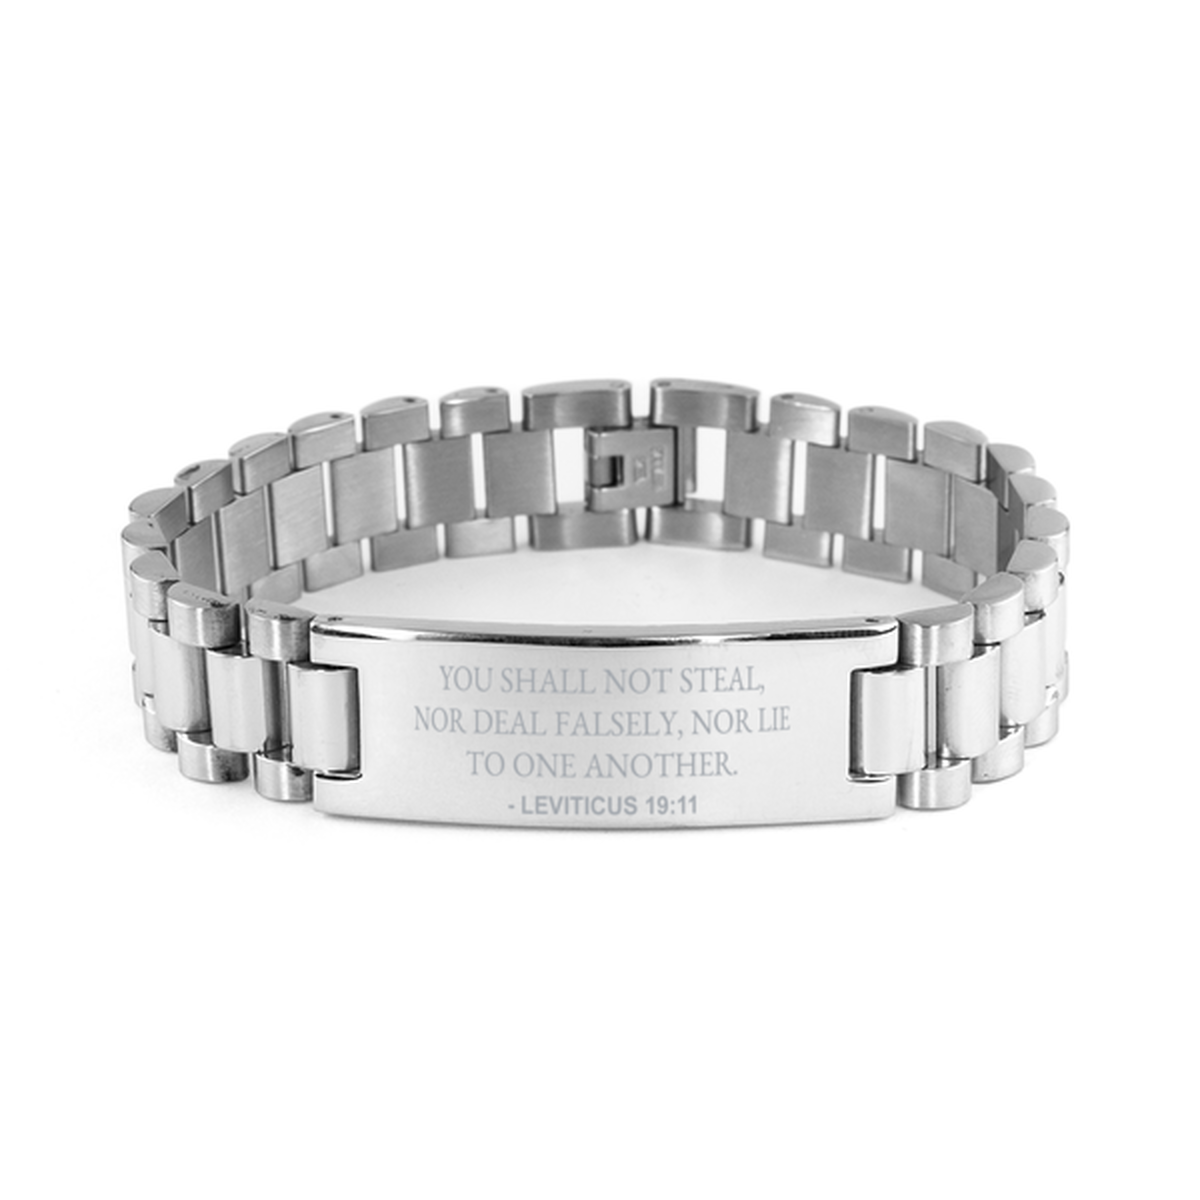 Christian Ladder Stainless Steel Bracelet, Leviticus 19:11 You Shall Not Steal, Nor Deal Falsely, Nor Lie To, Motivational Bible Verse Gifts For Men Women